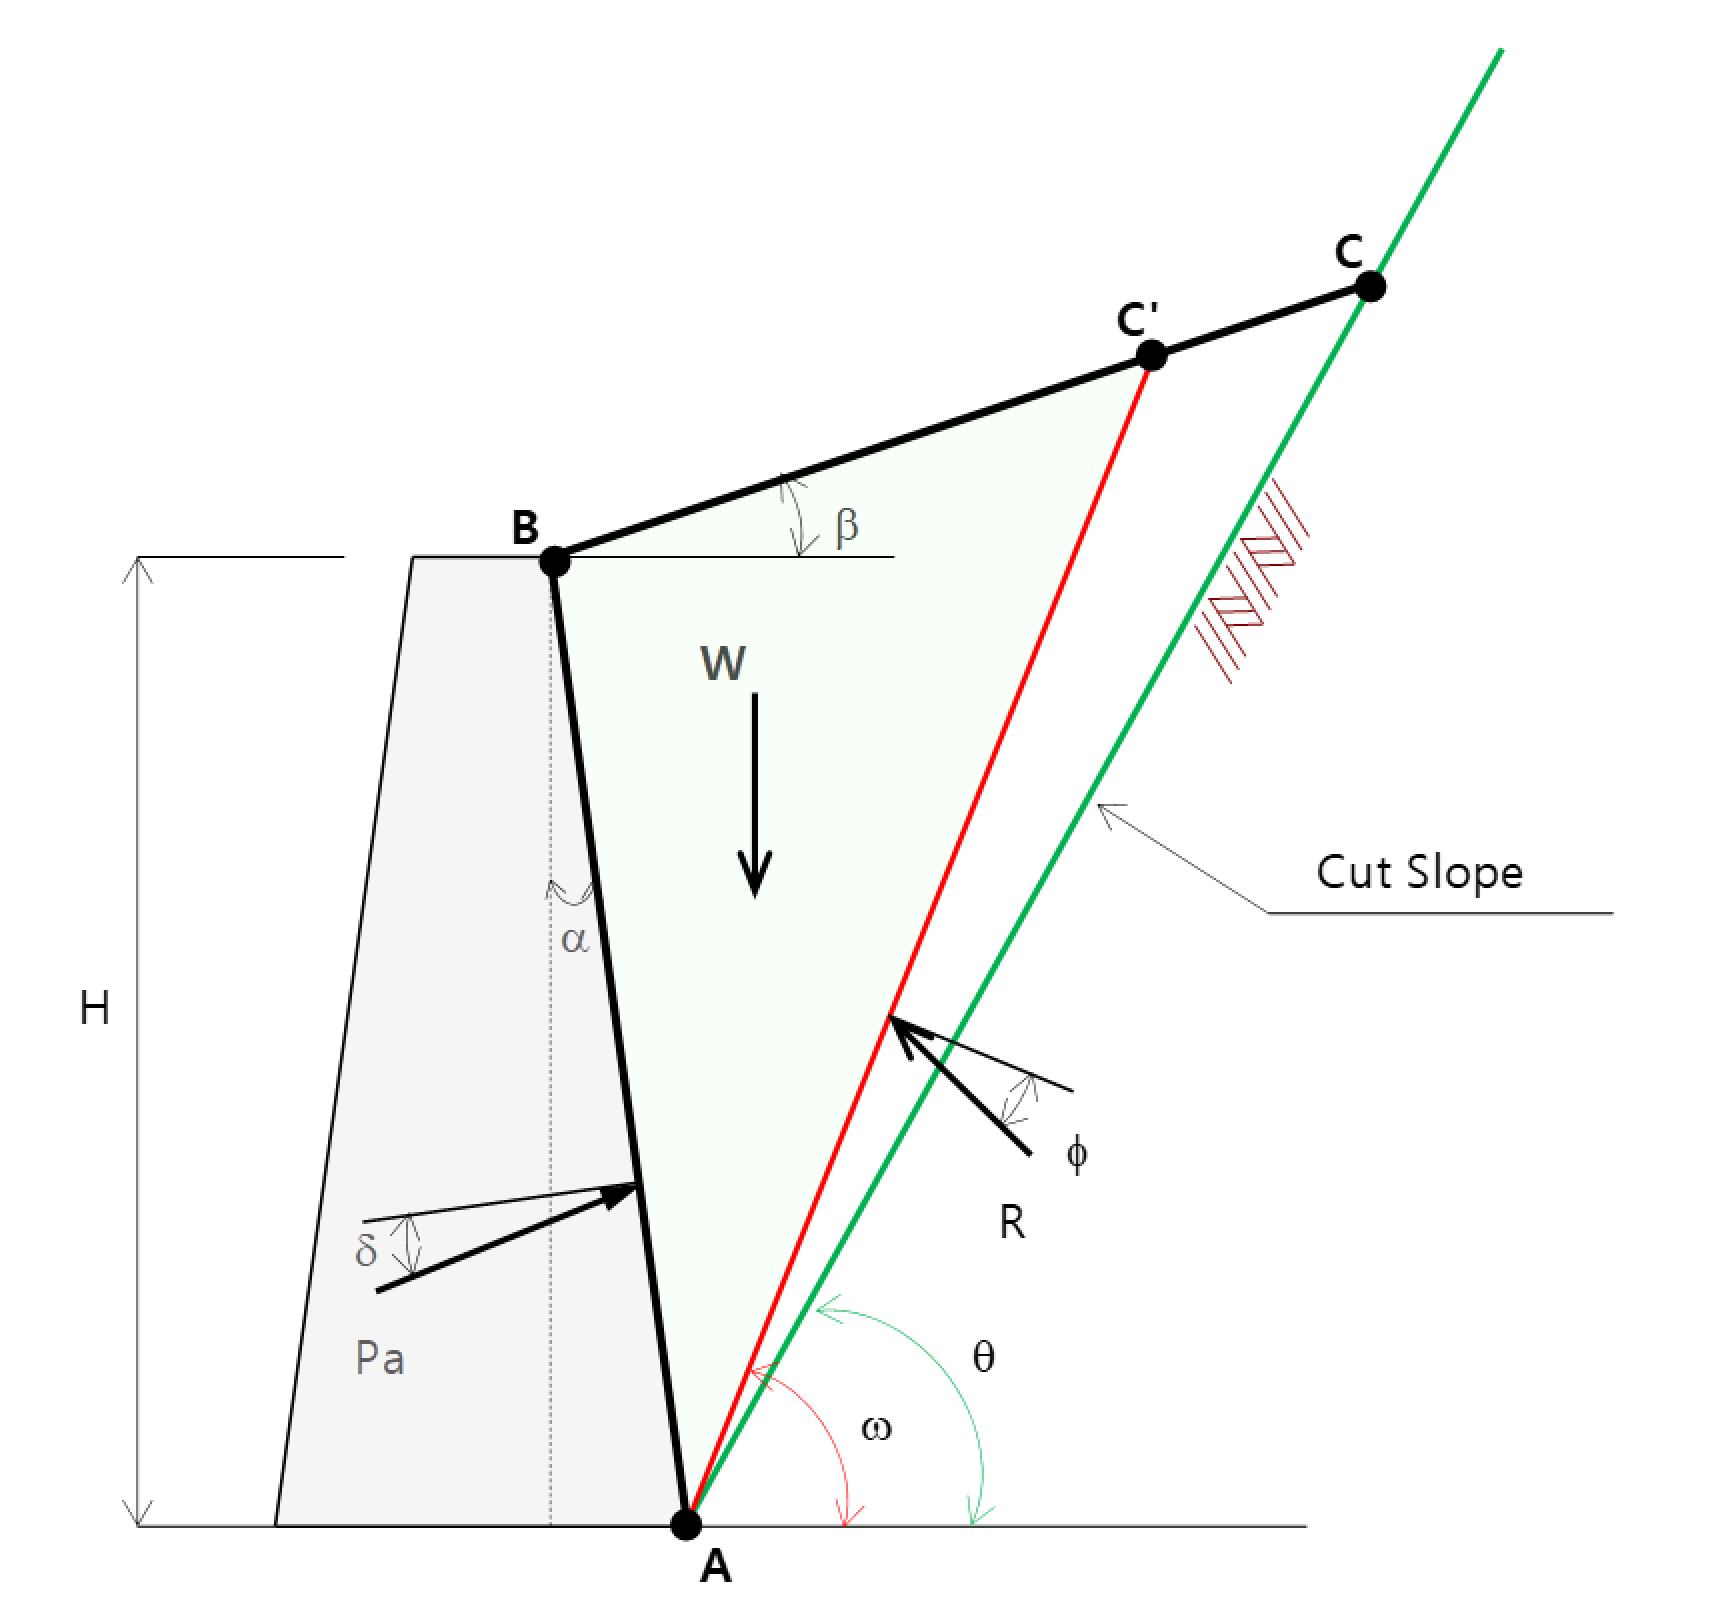 If the failure angle of the wedge is greater than the slope angle